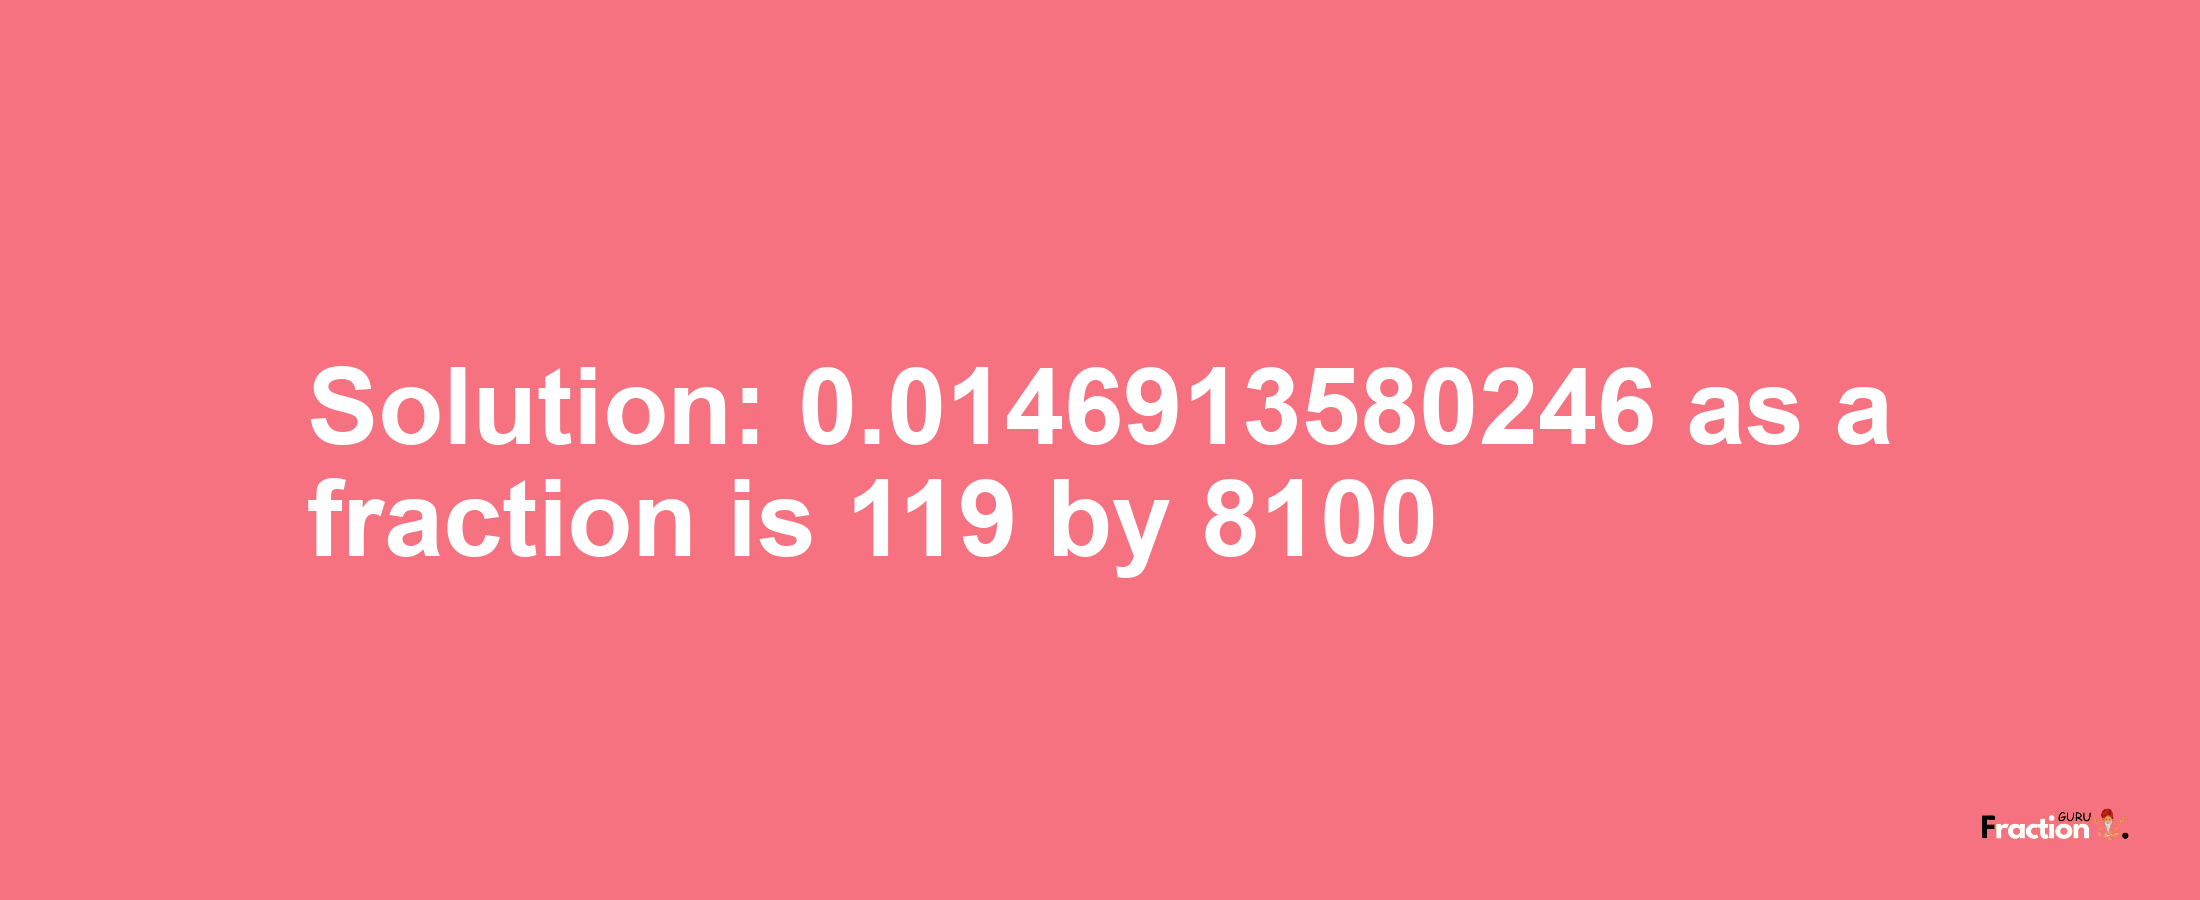 Solution:0.0146913580246 as a fraction is 119/8100